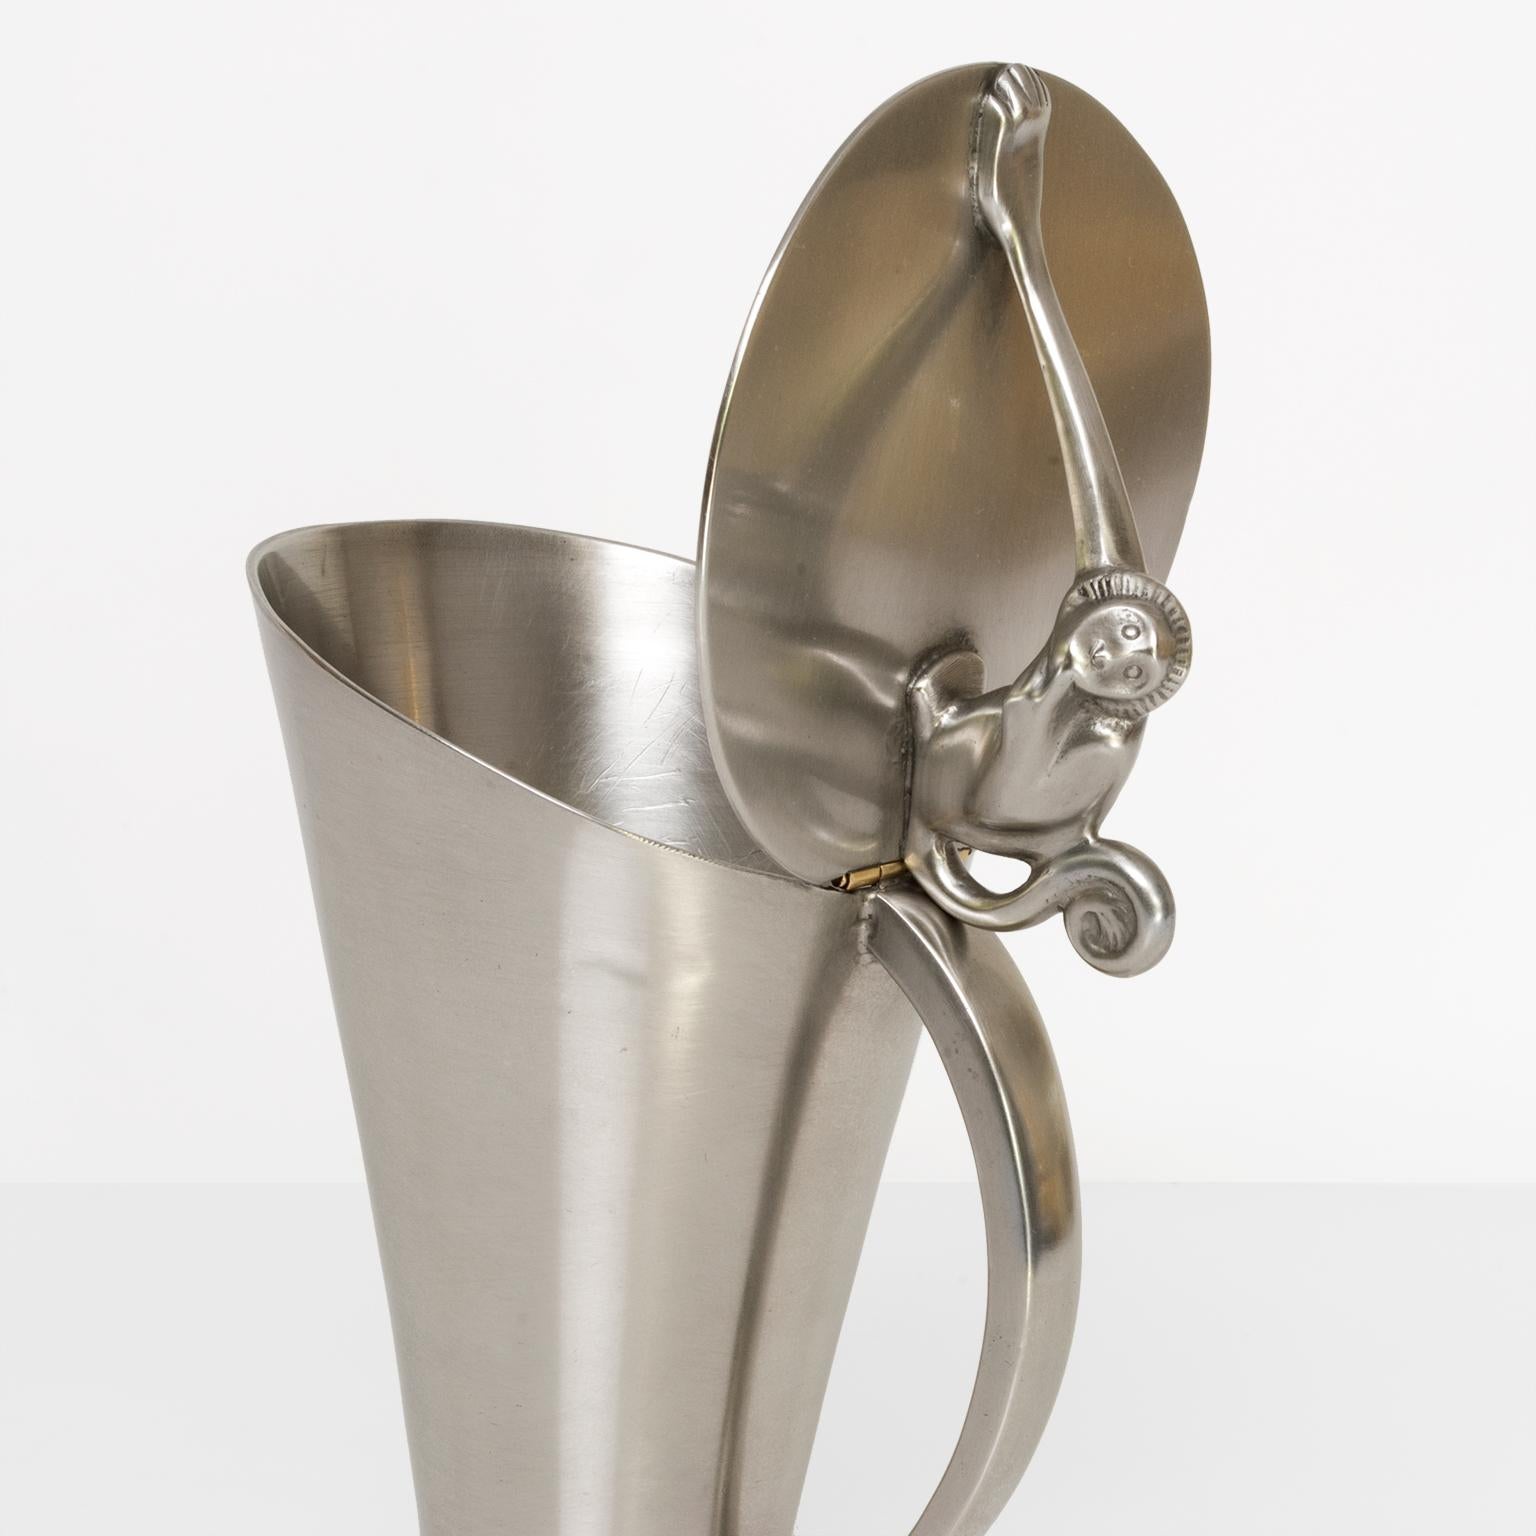 Scandinavian Swedish Art Deco Pewter Pitcher with Monkey from G.A.B, 1933 For Sale